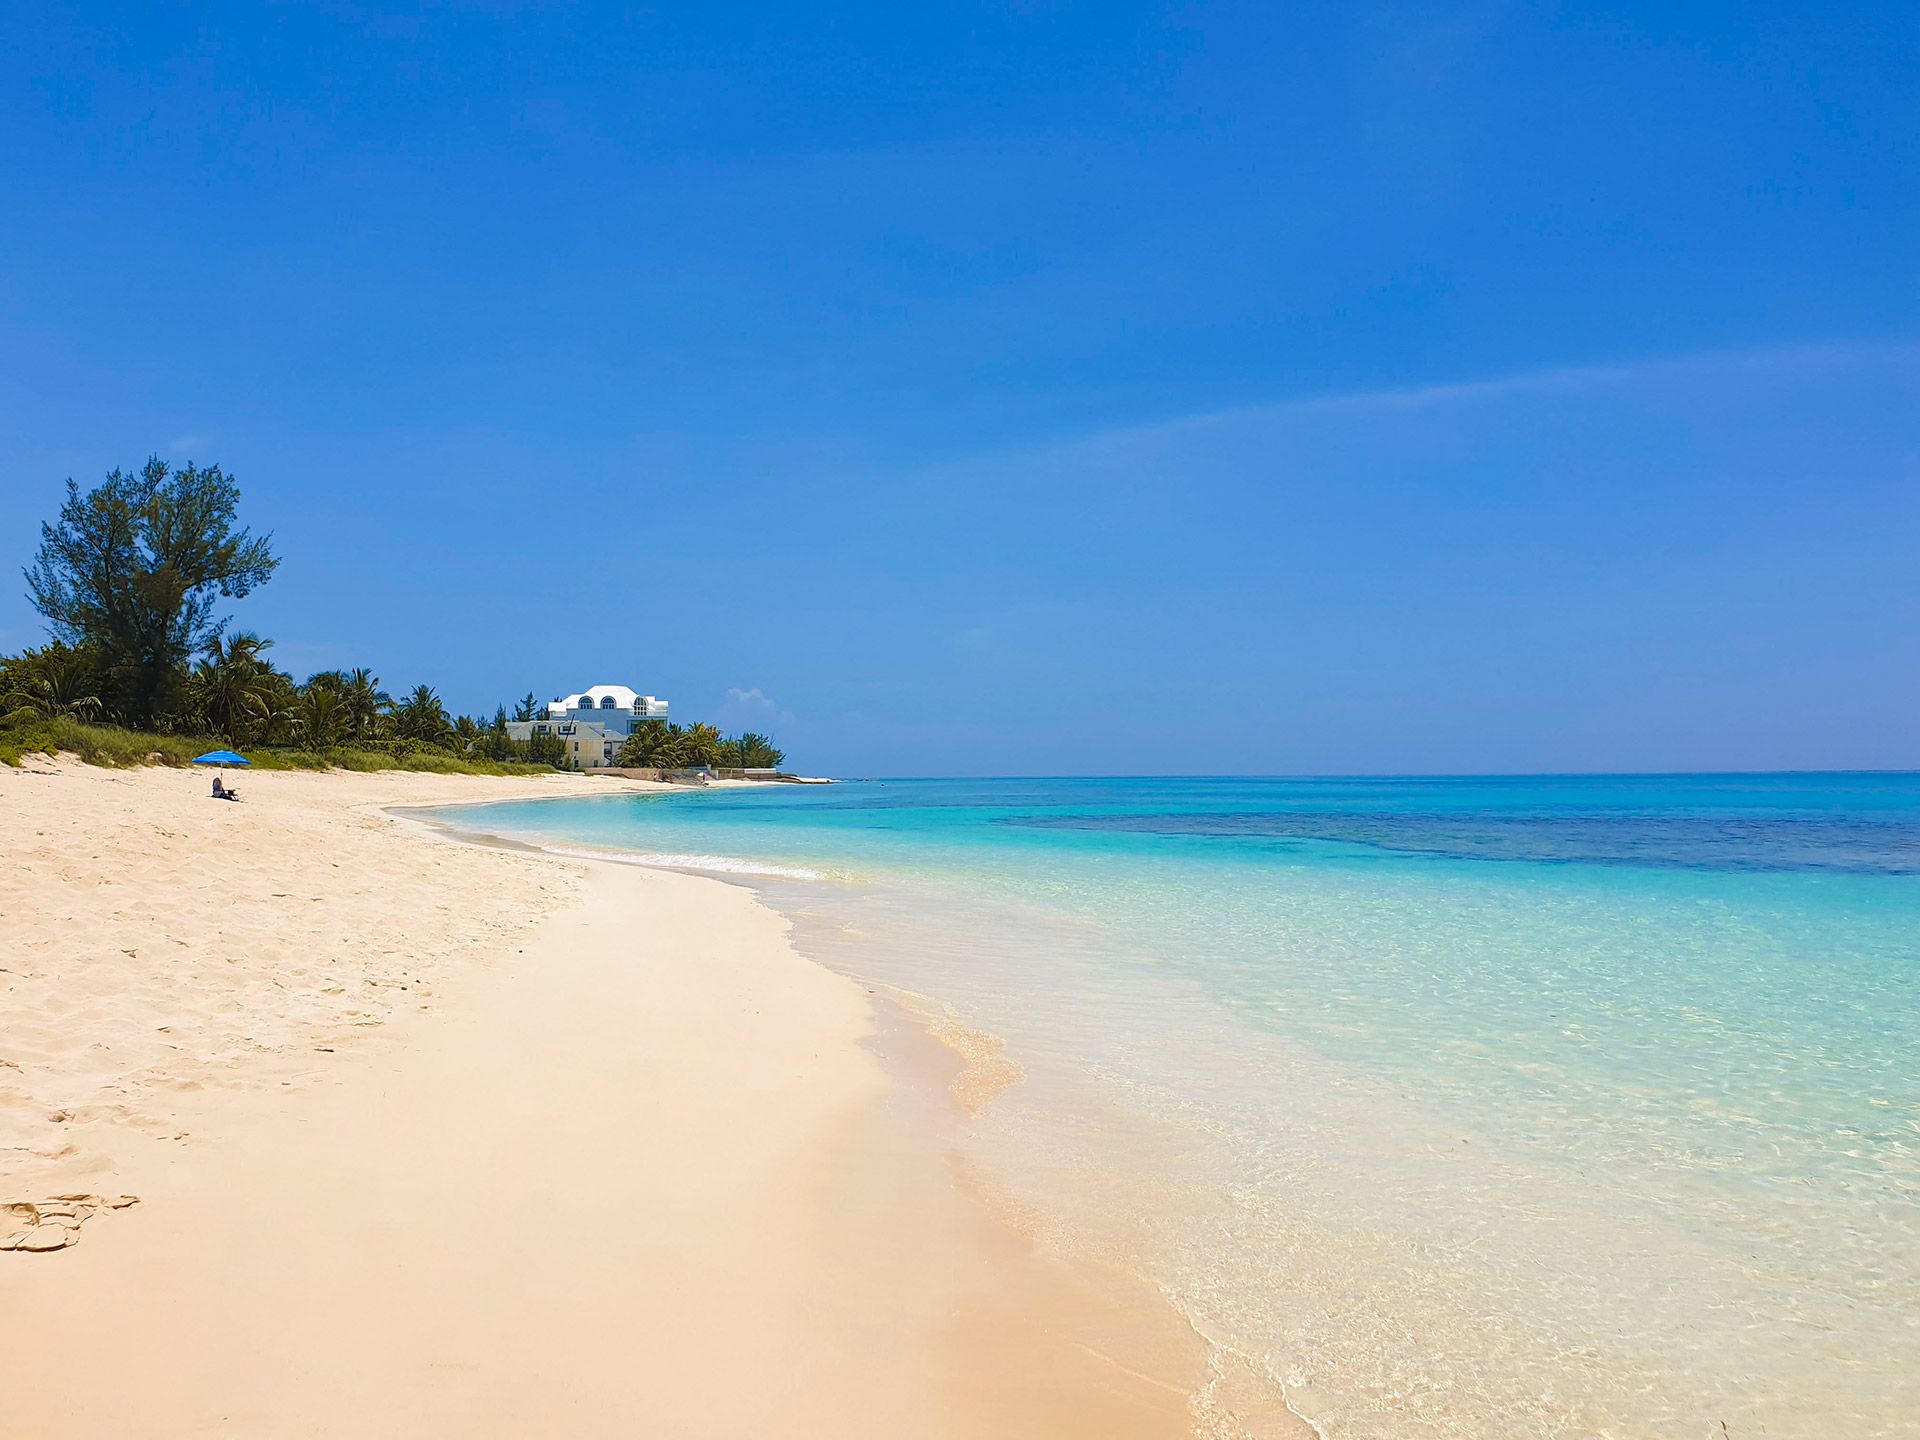 The 12 Best Beaches in Nassau, The Bahamas (Incl. Photos) - Sandals